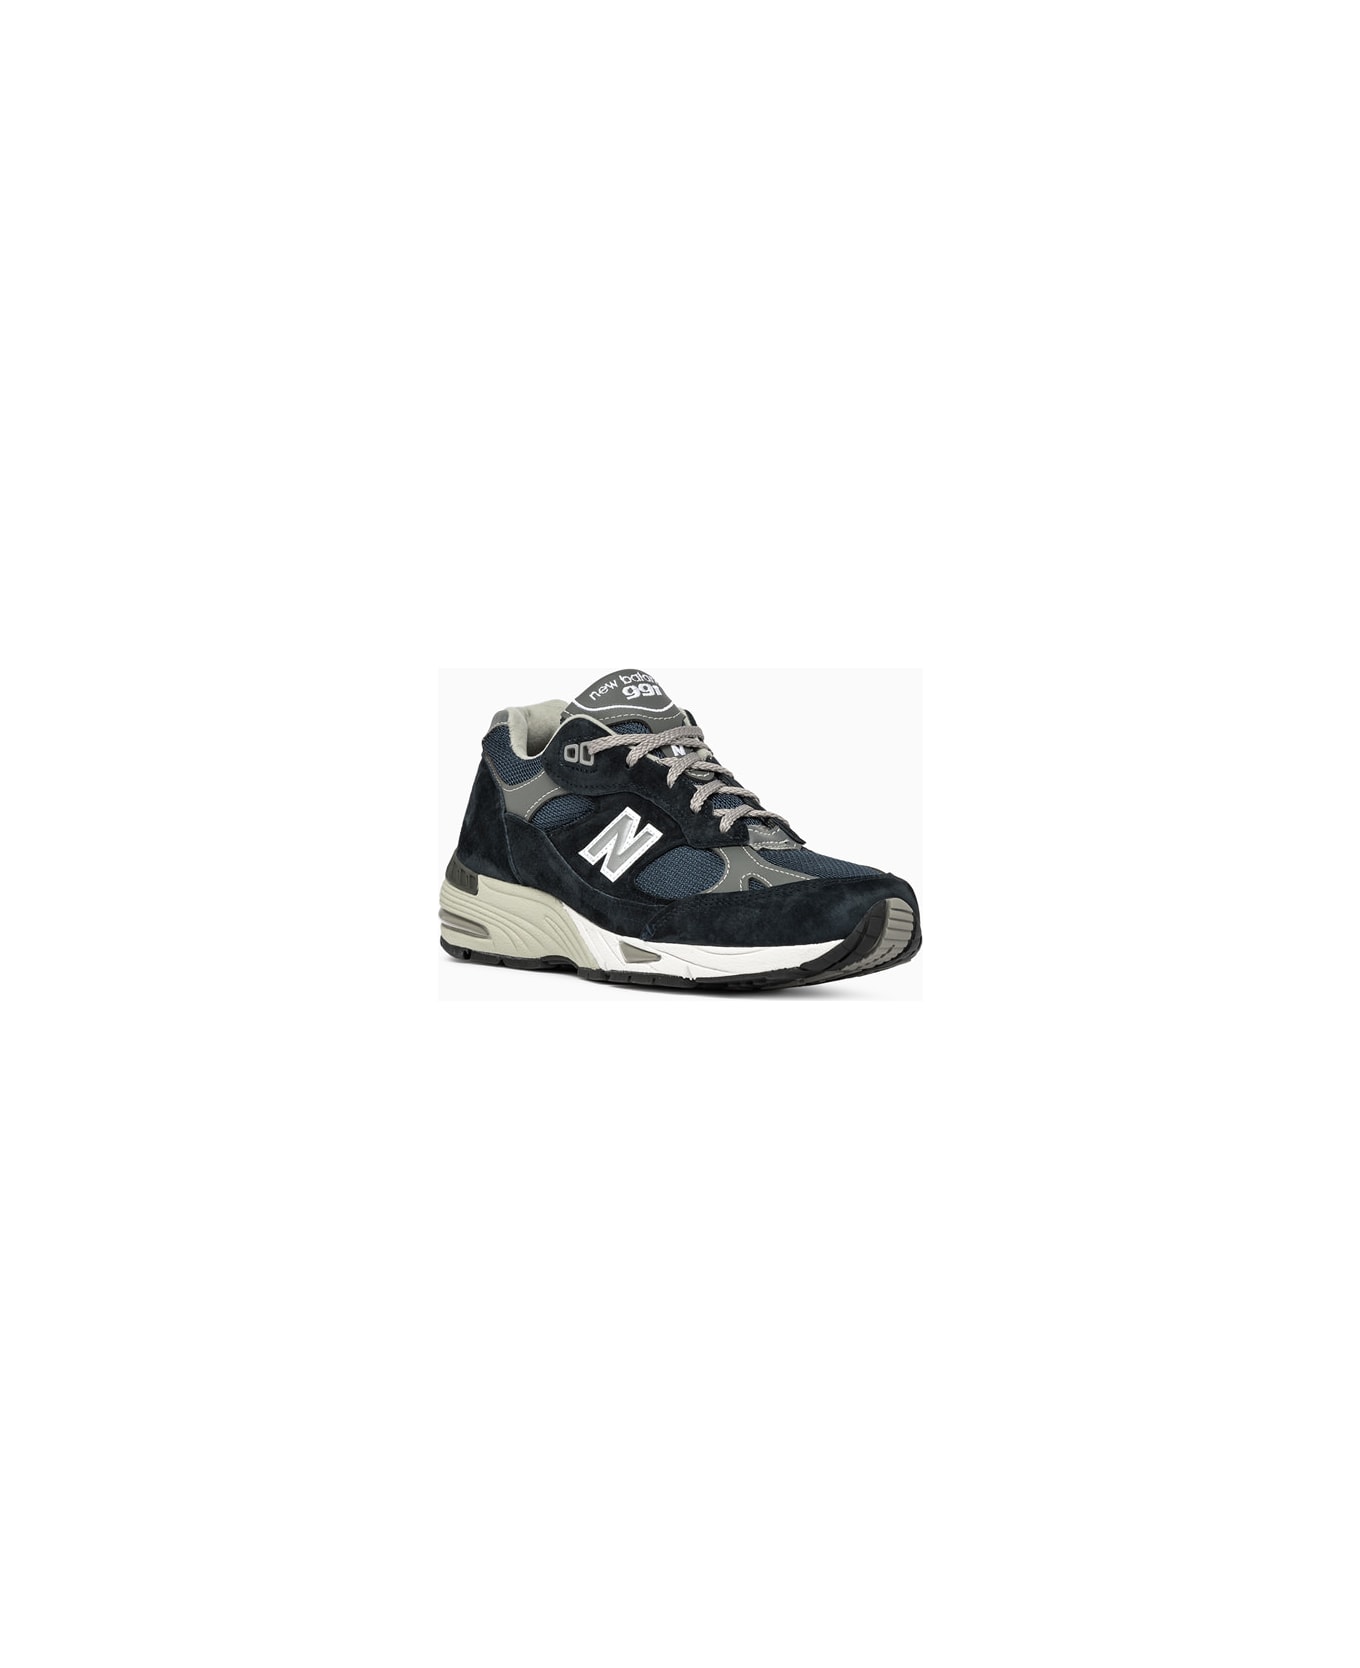 New Balance 991v1 Made In Uk Sneakers W991nv - Blue